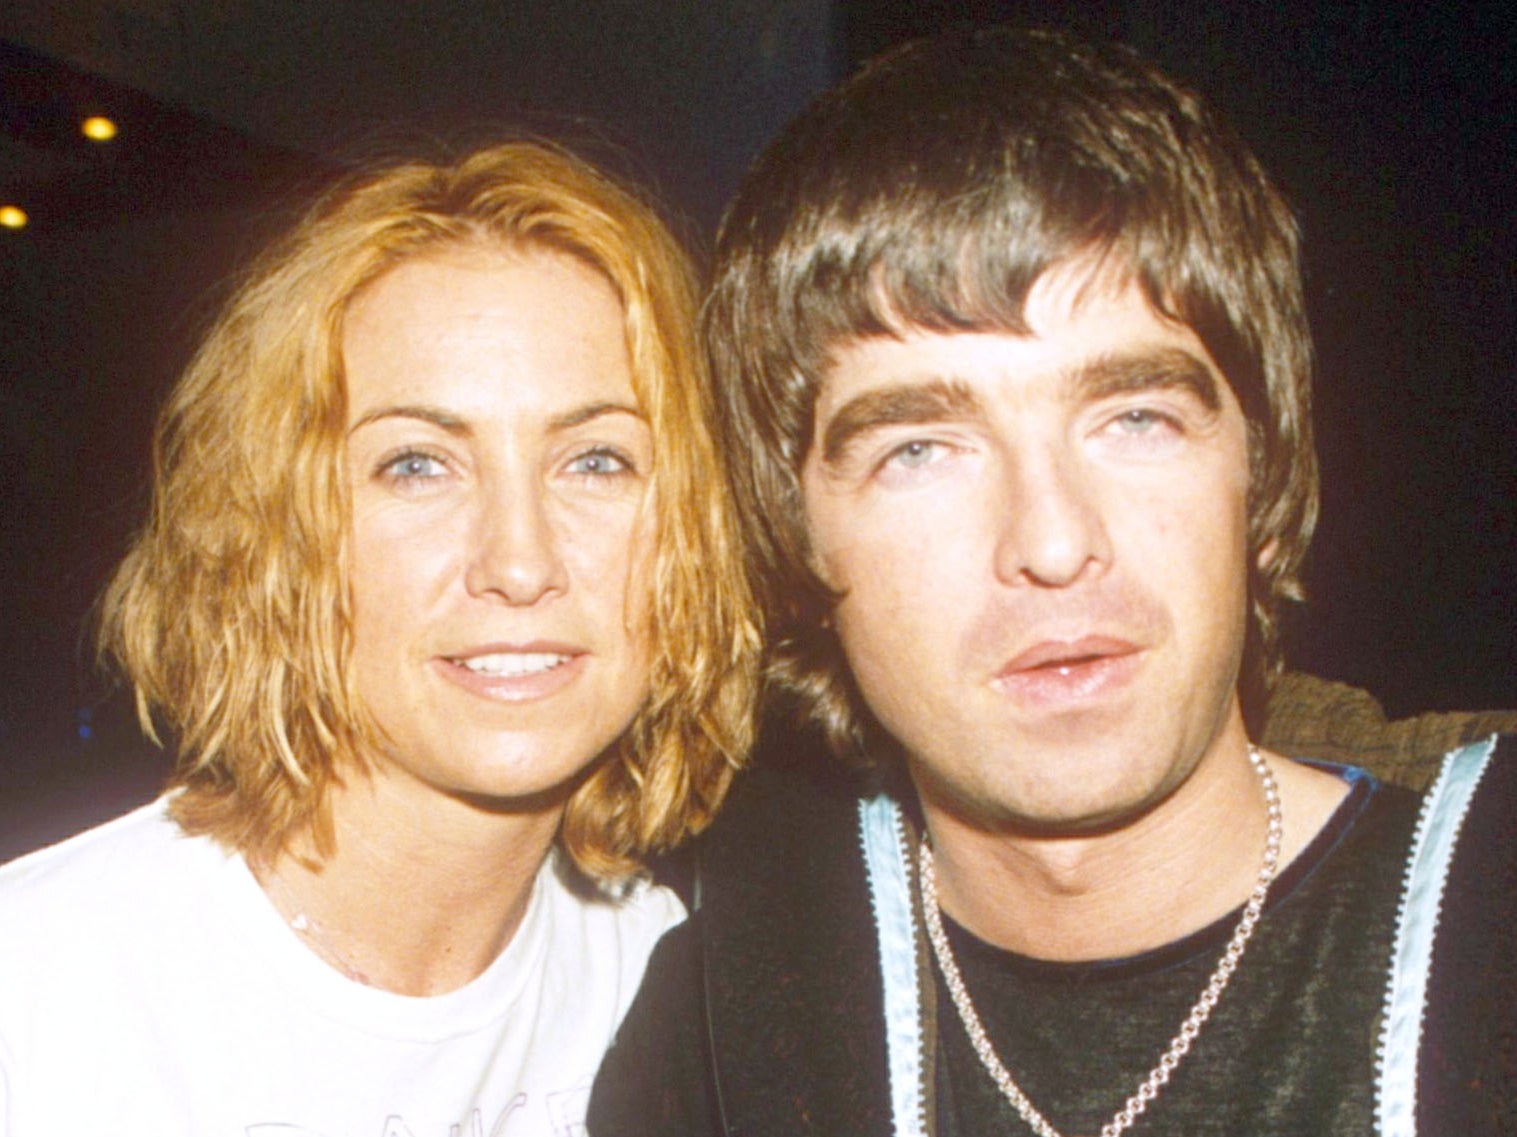 Meg Mathews and Noel Gallagher in 1998